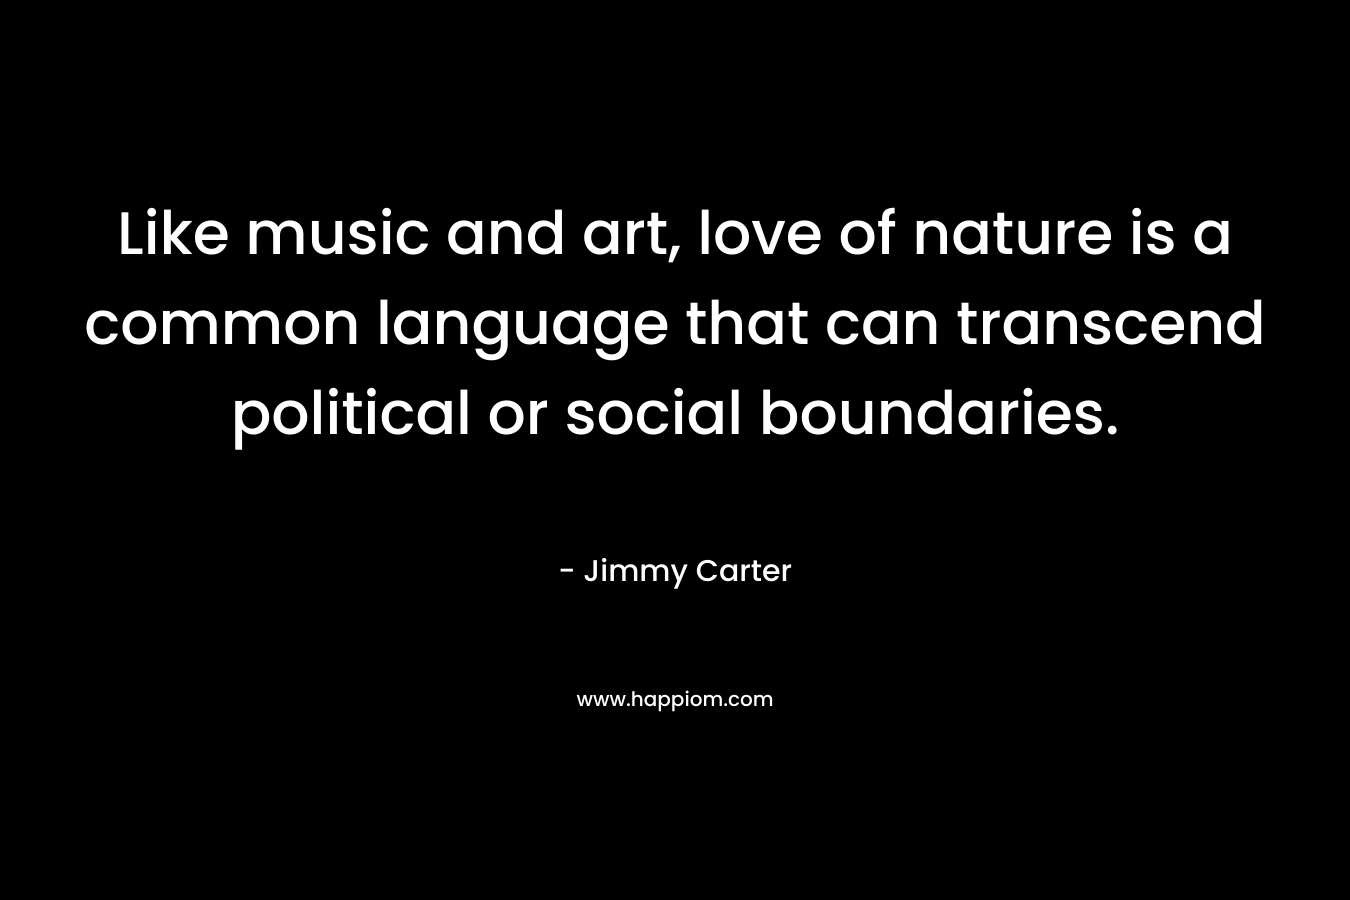 Like music and art, love of nature is a common language that can transcend political or social boundaries. – Jimmy Carter